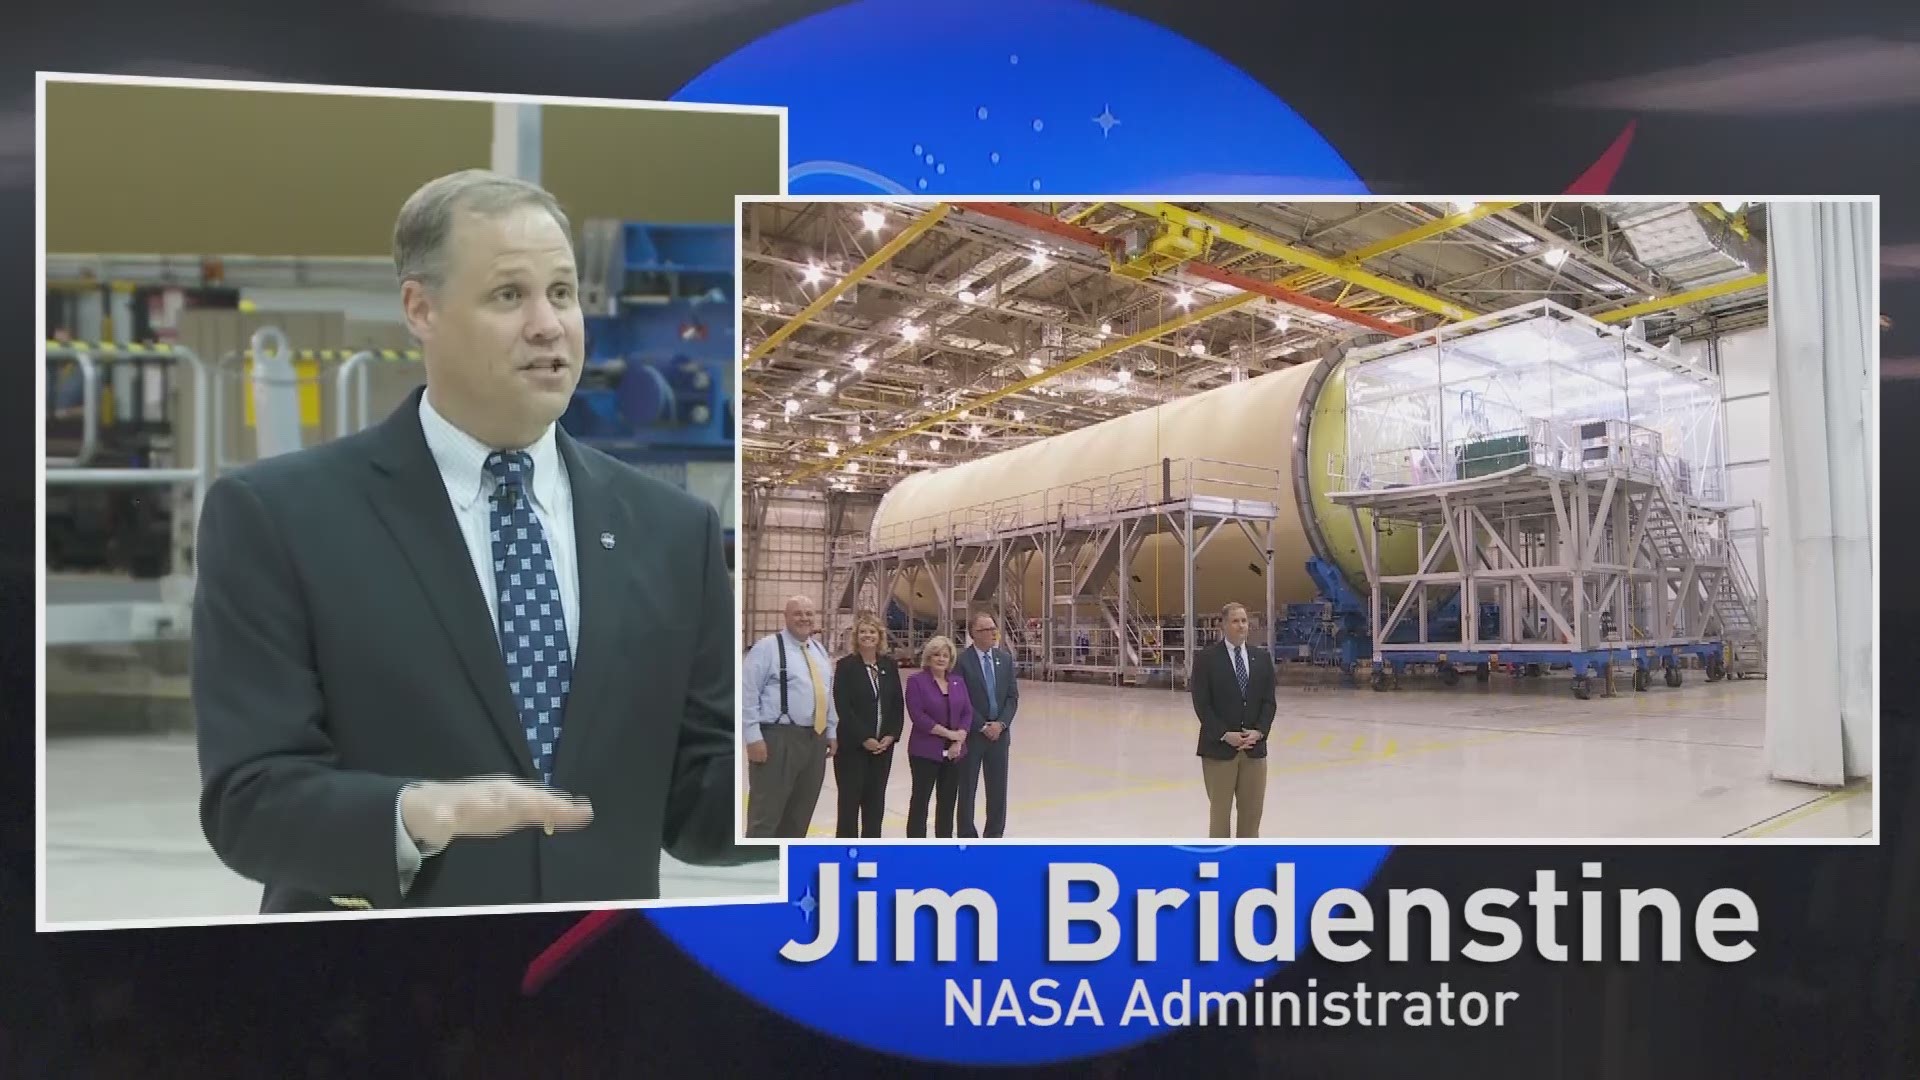 NASA's mission to go back to the moon and then to Mars and beyond flies through New Orleans.